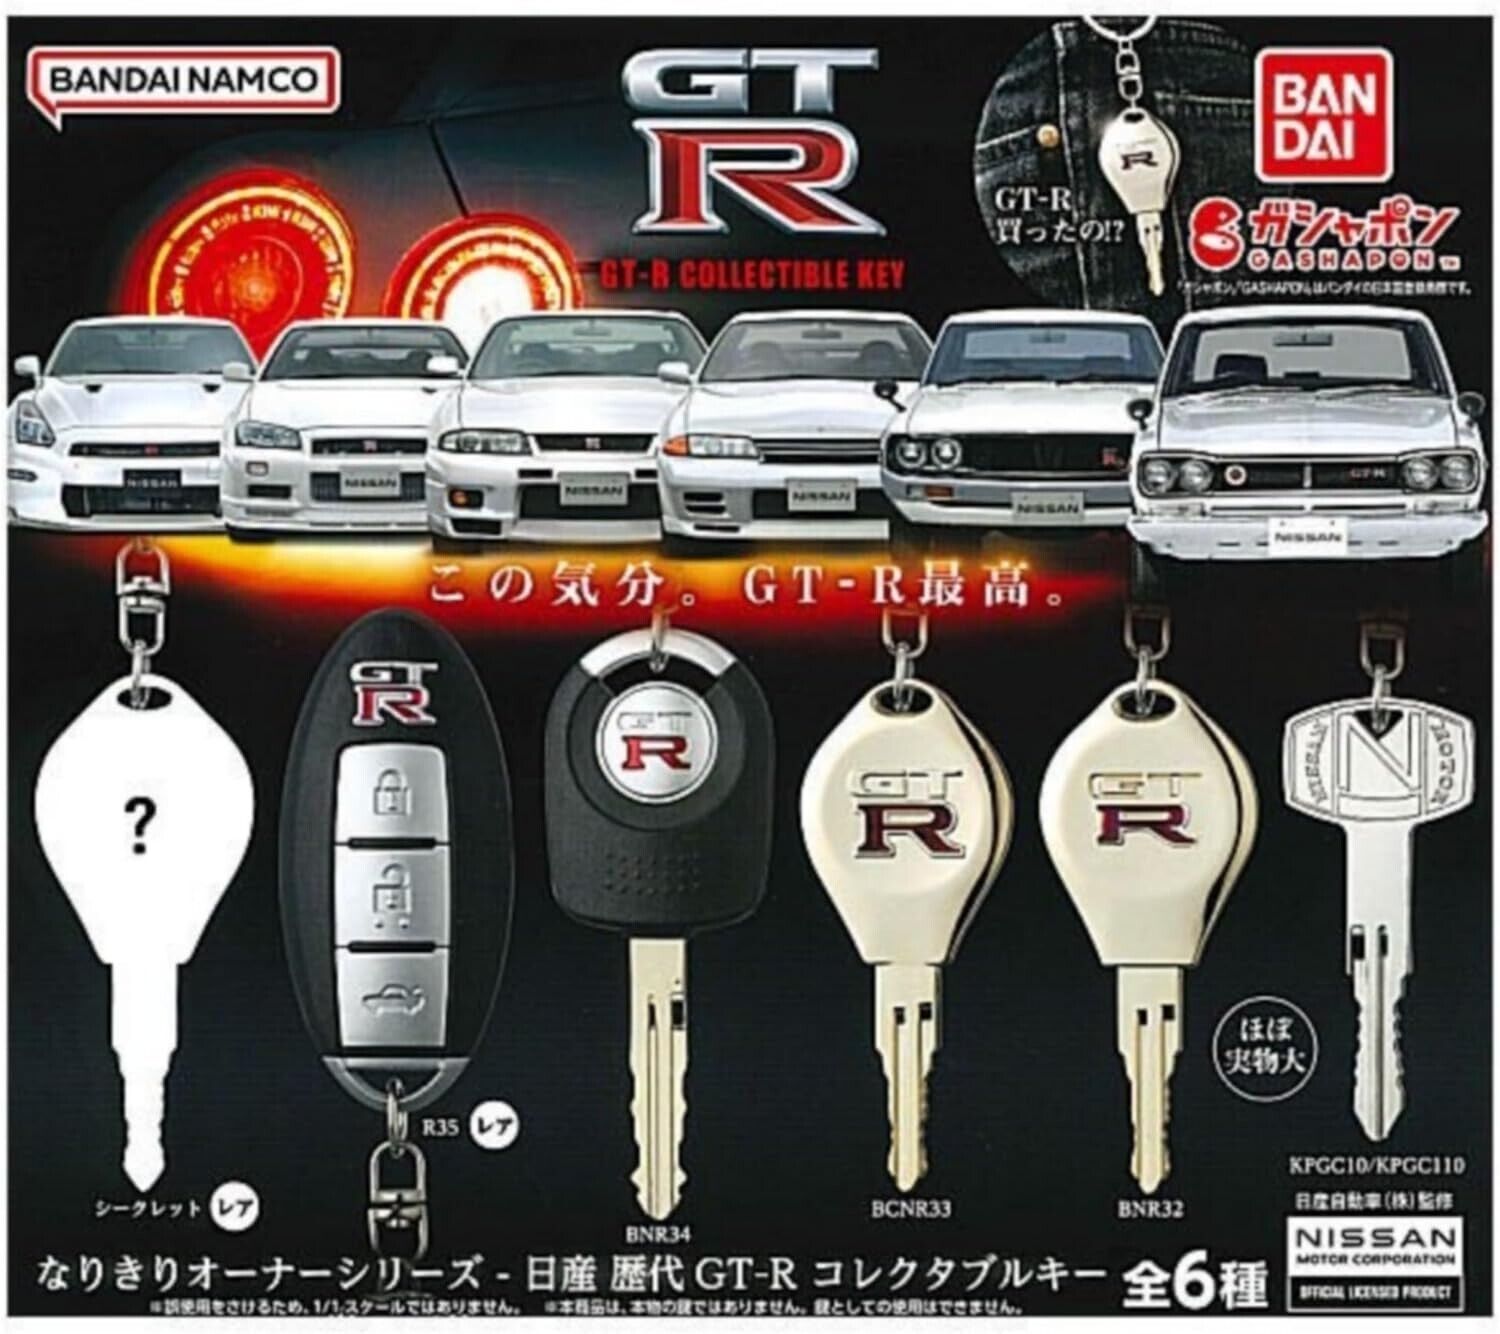 BANDAI Nissan GT-R Collectible Key 6 piece Complete Capsule Toy NEW from Japan